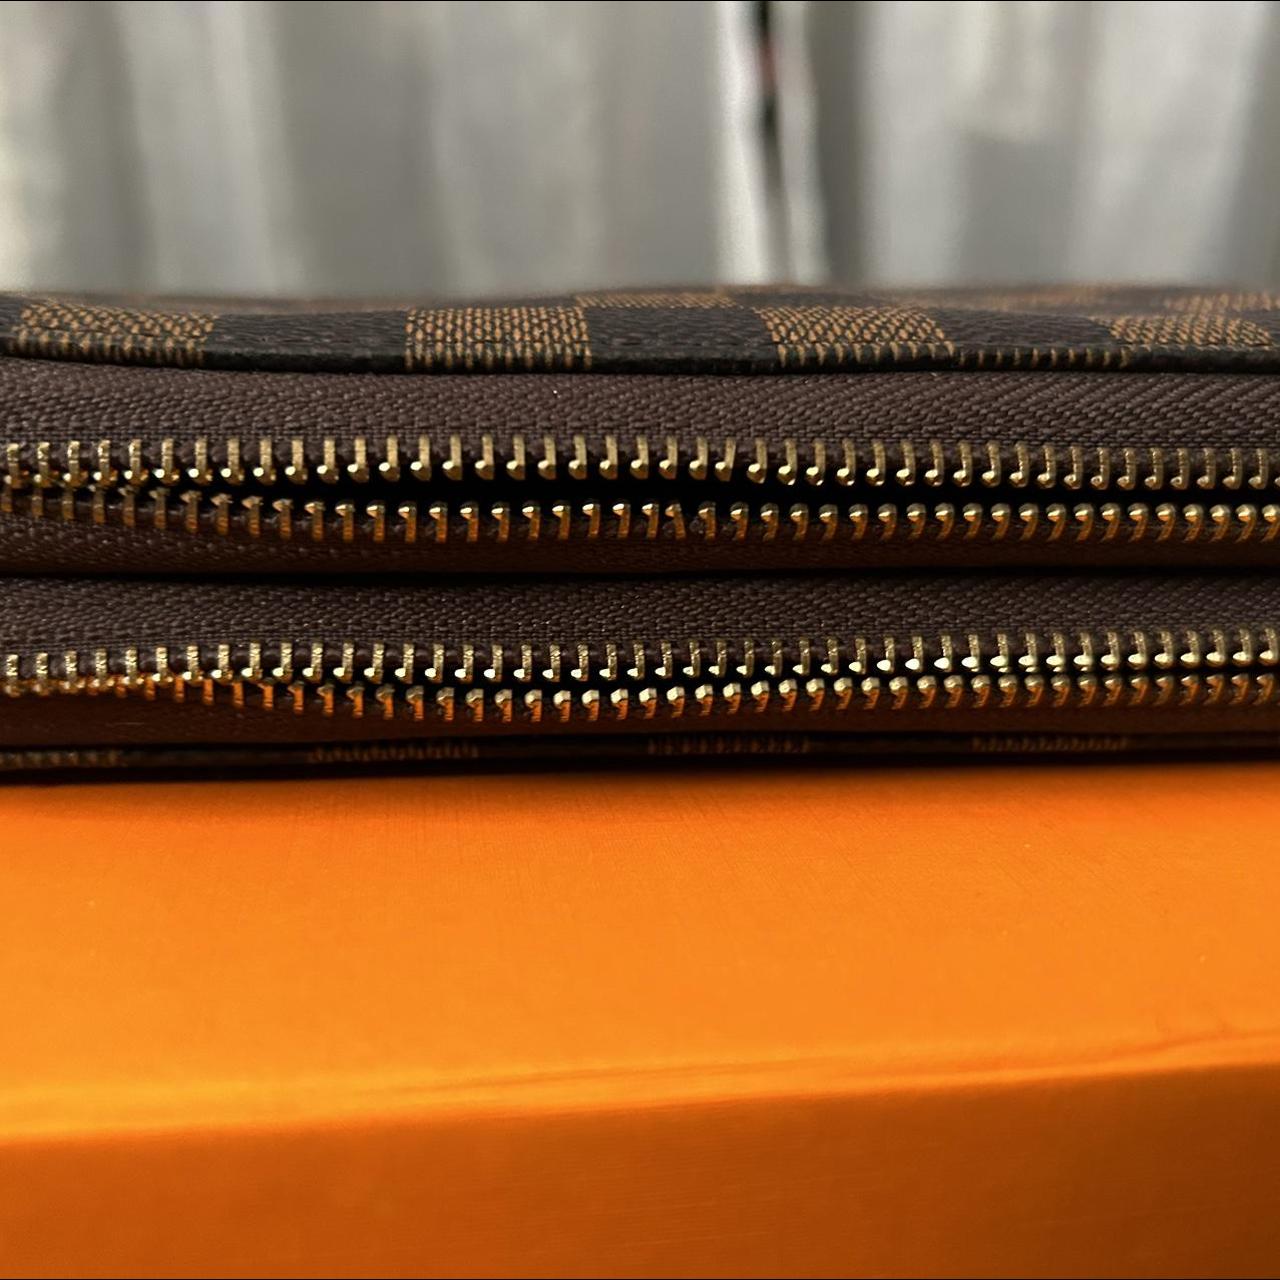 LV wallet slightly used clean checkered square - Depop